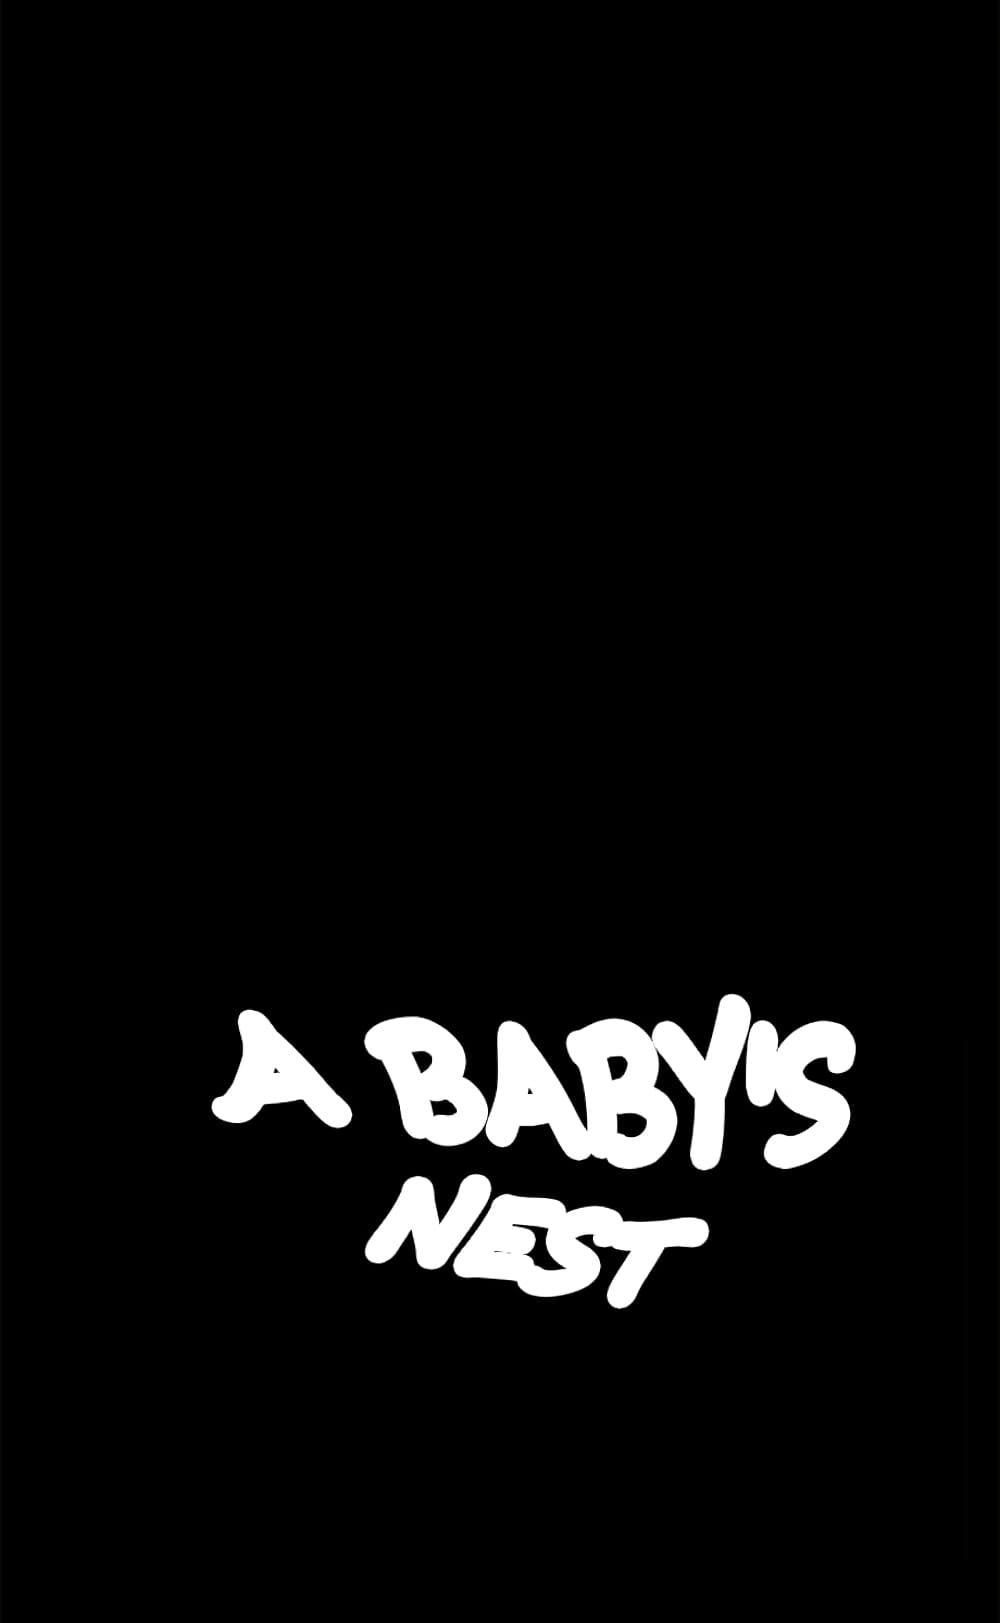 A Baby’s Nest4 (2)